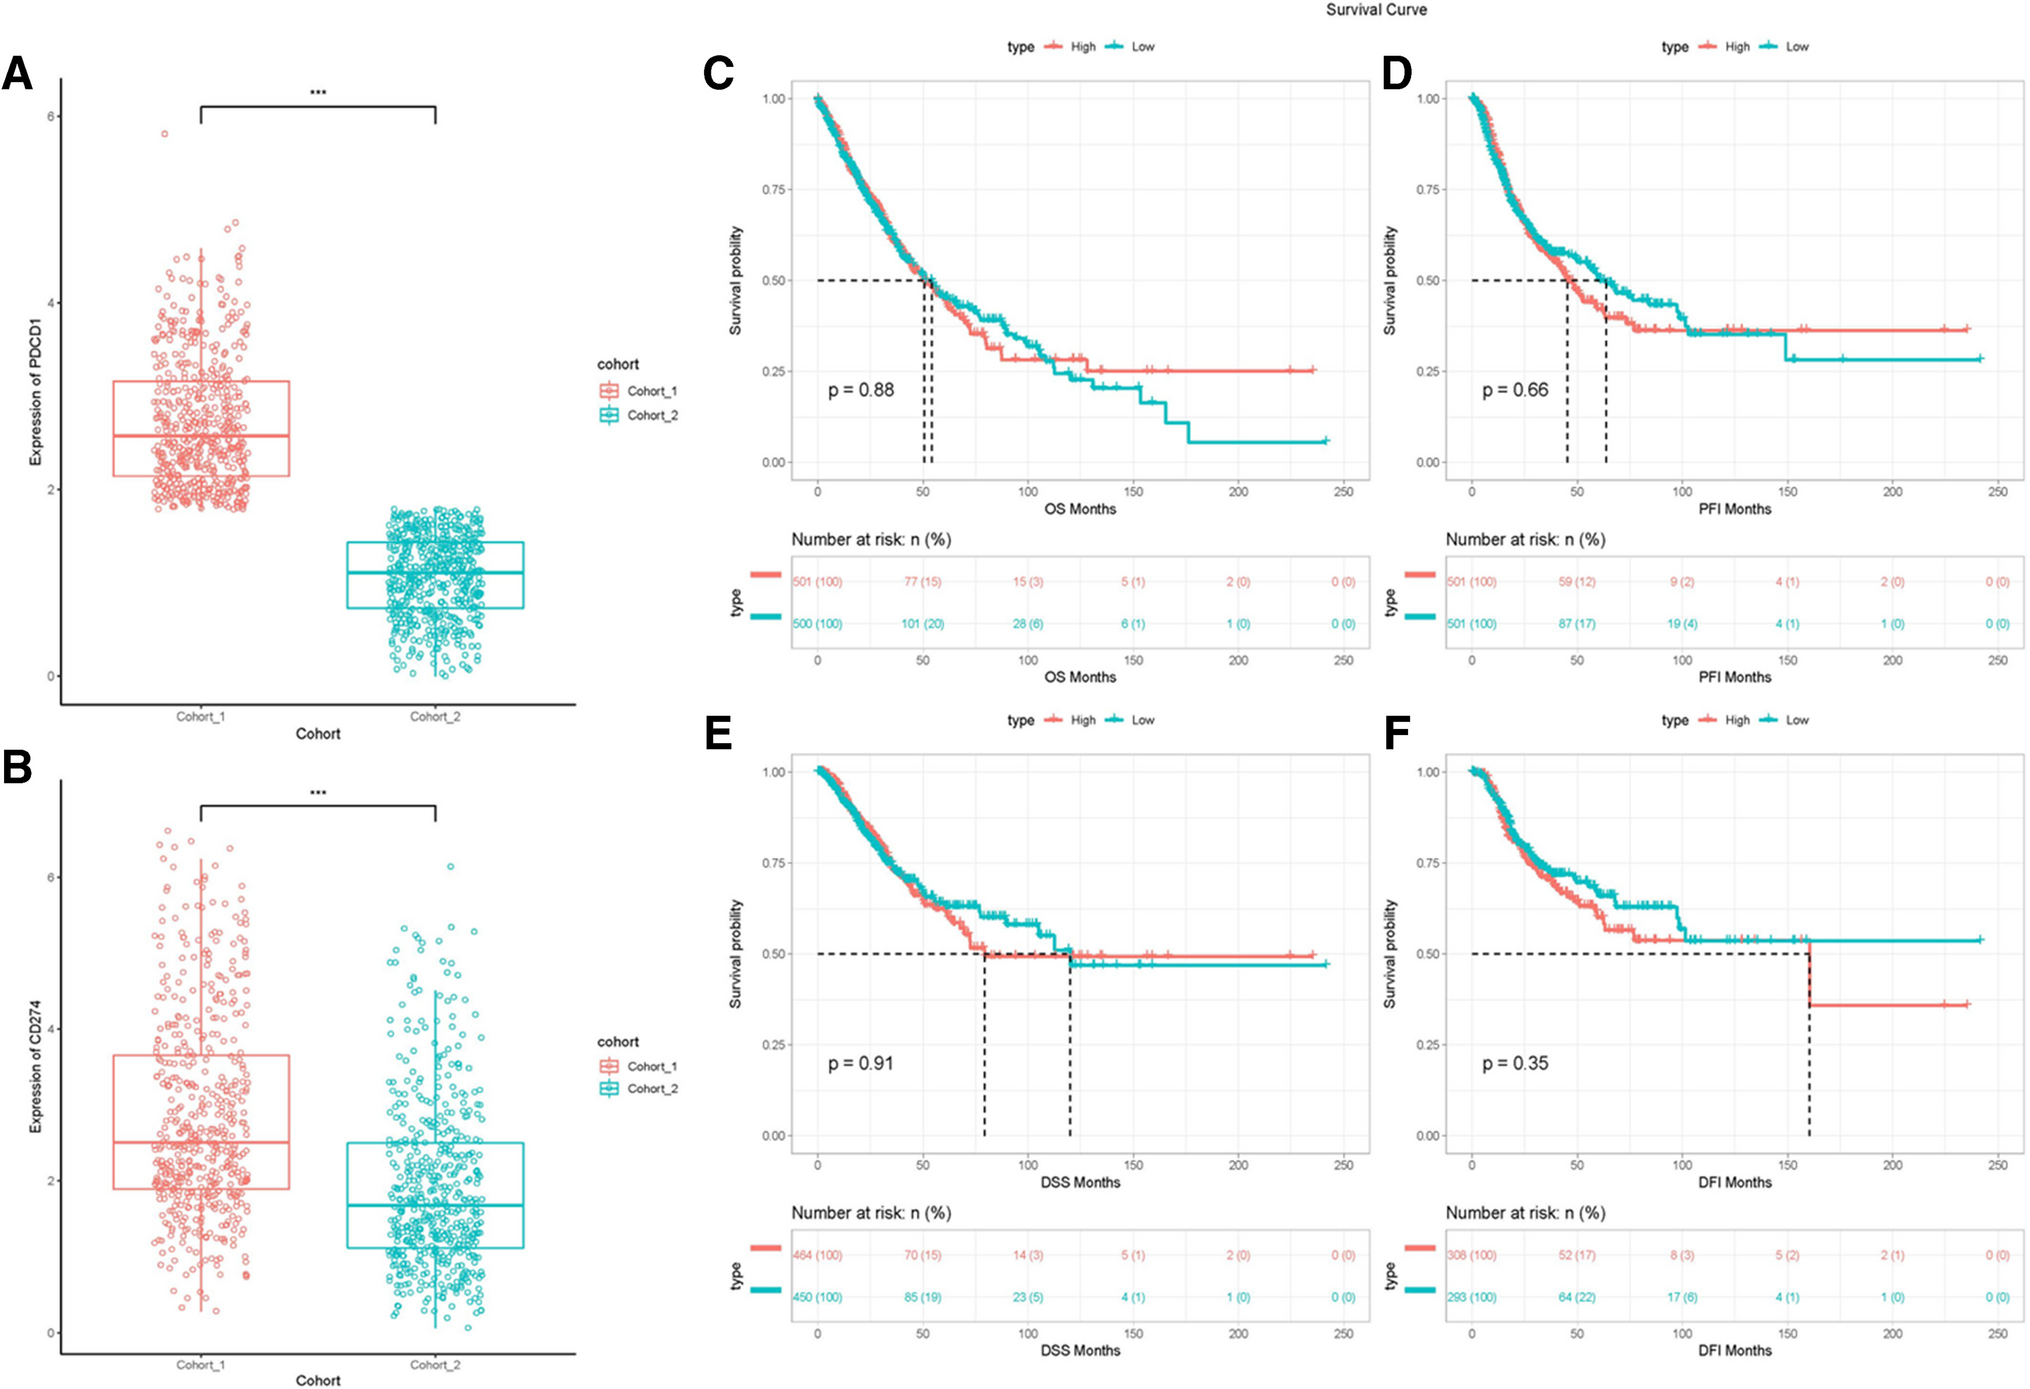 Genomic Profiling Reveals Immune-Related Gene Differences in Lung Cancer Patients Stratified by PD1/PDL1 Expression: Implications for Immunotherapy Efficacy